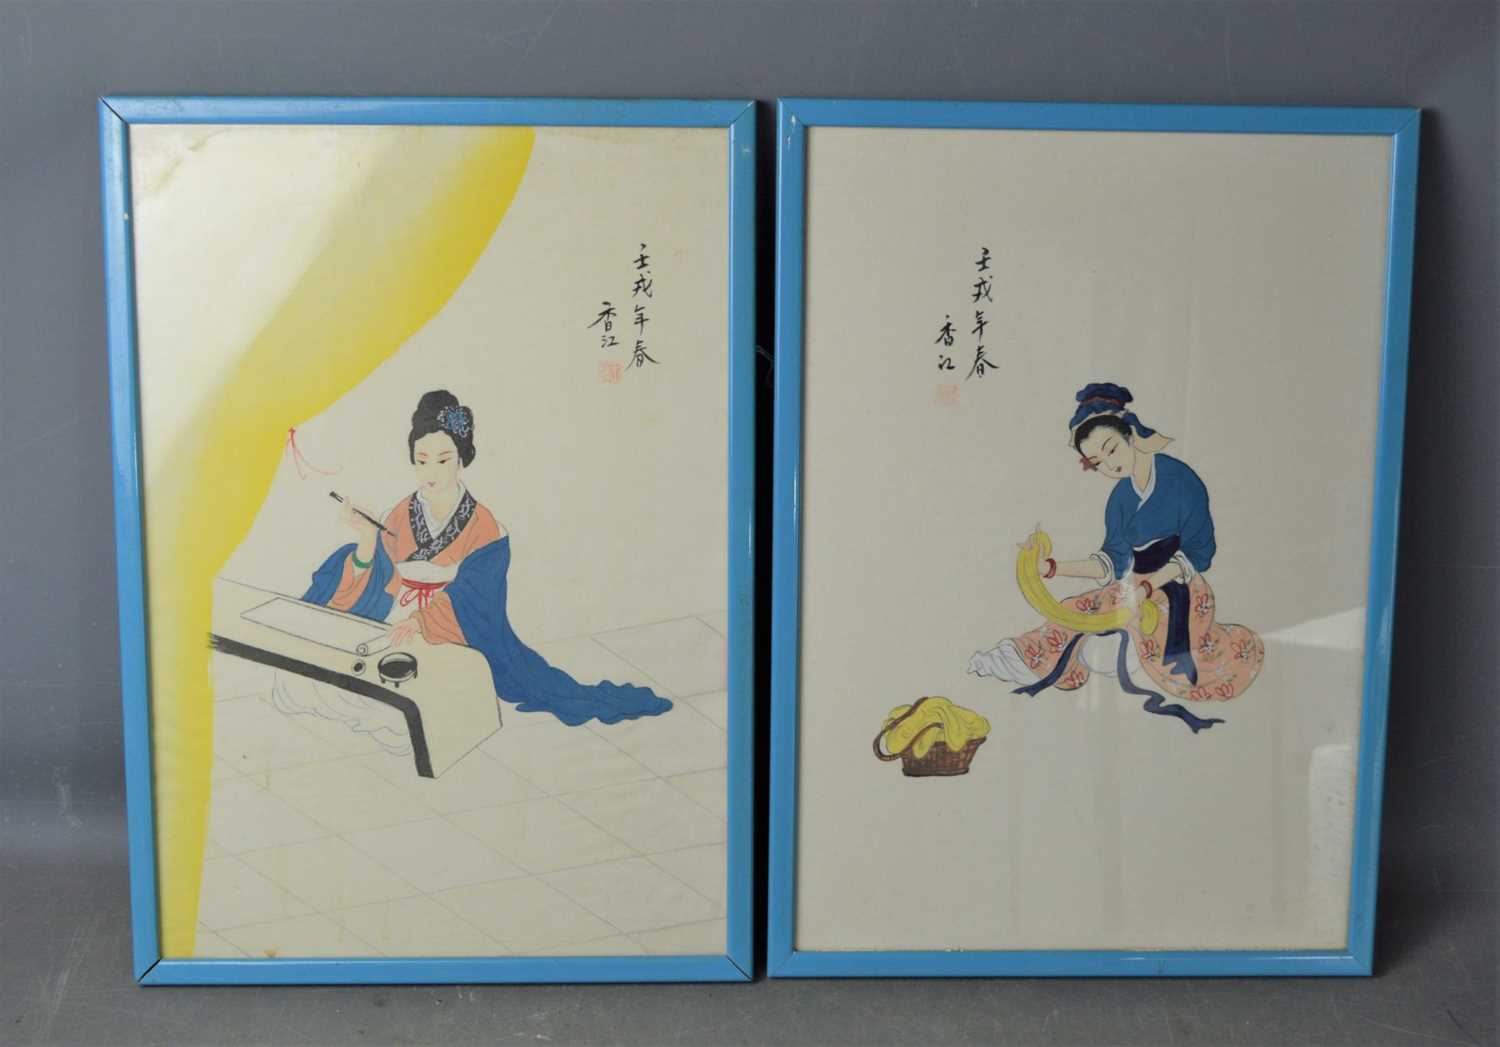 A pair of framed and glazed Japanese Geisha paintings (possibly woodblock print)